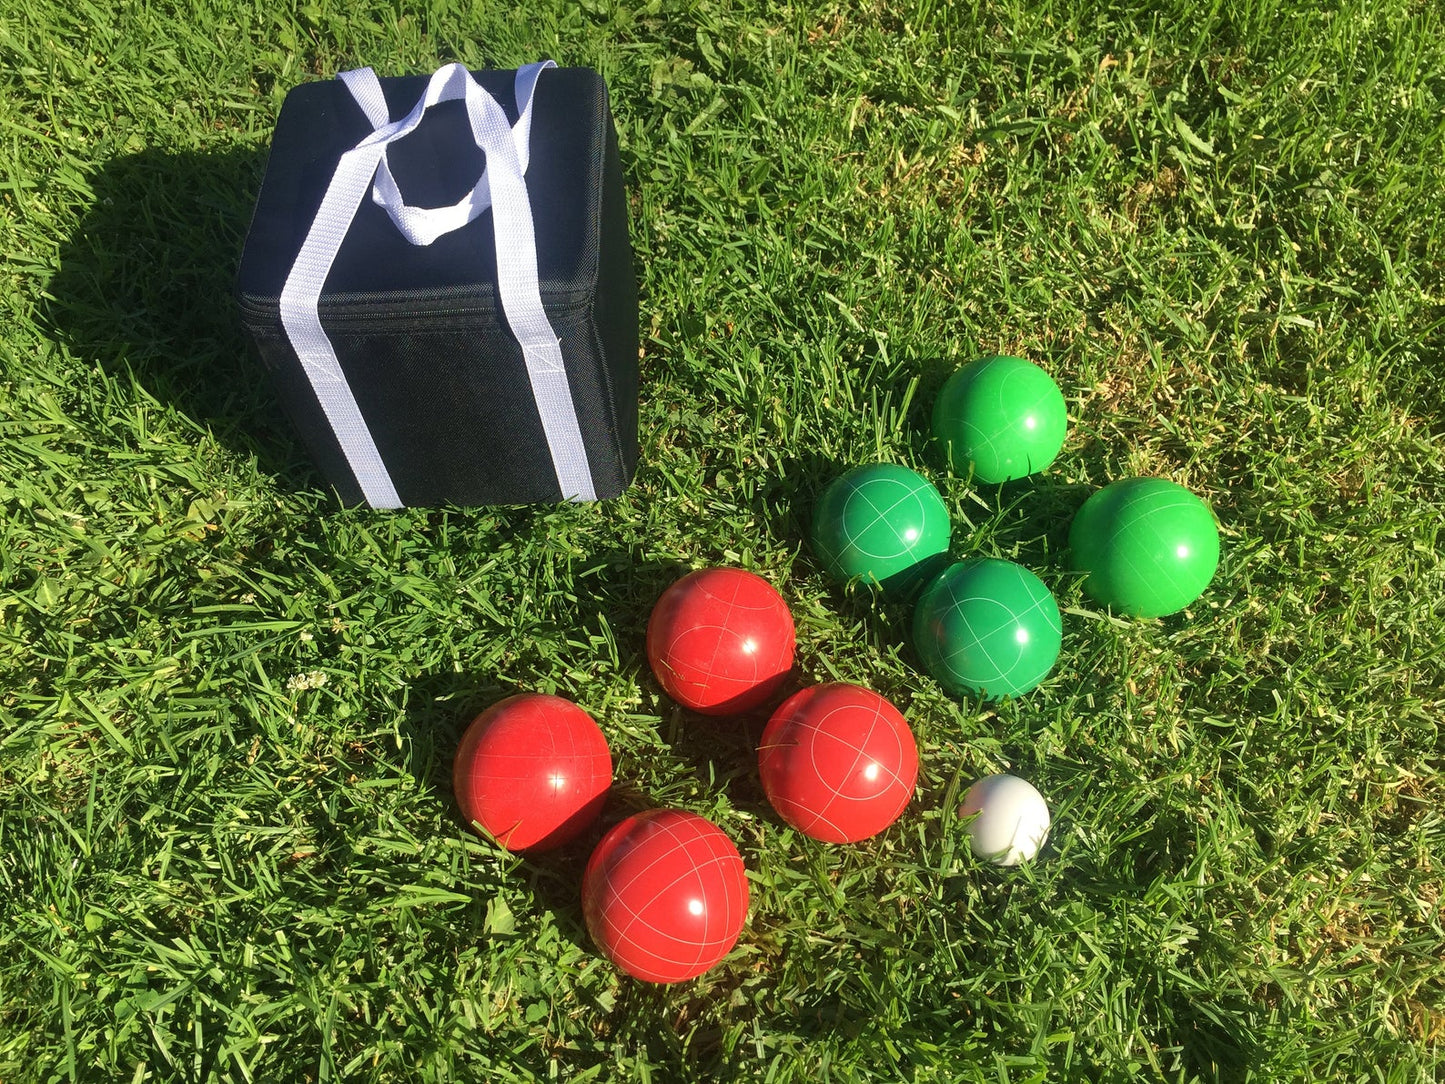 107mm Bocce Red and Green Balls with Black Bag